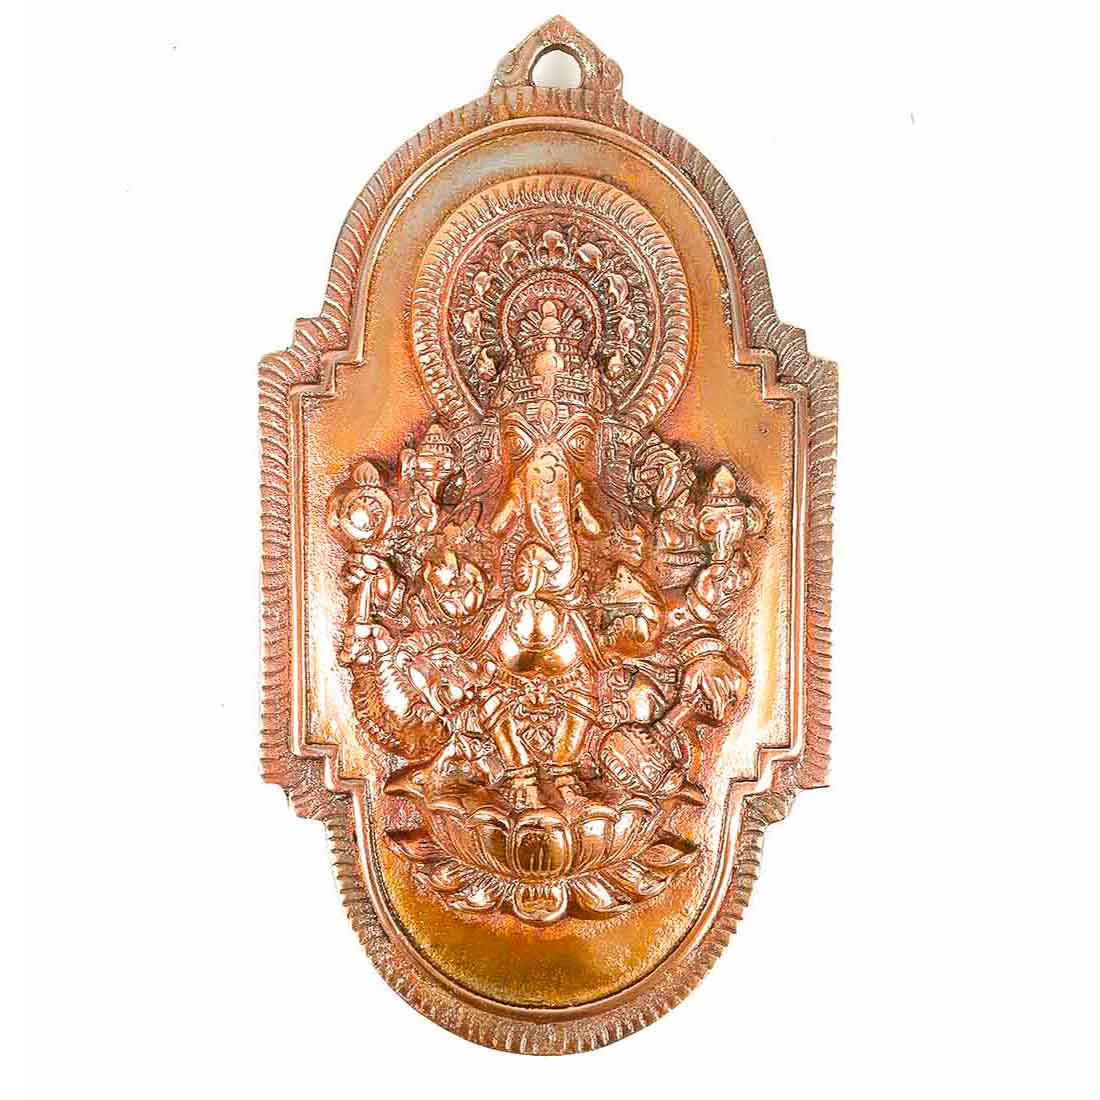 Ganesh Wall Hanging Statue | Lord Ganesha Wall Art - for Home, Puja, Living Room & Office | Antique Idol for Religious & Spiritual Decor  - 12 inch